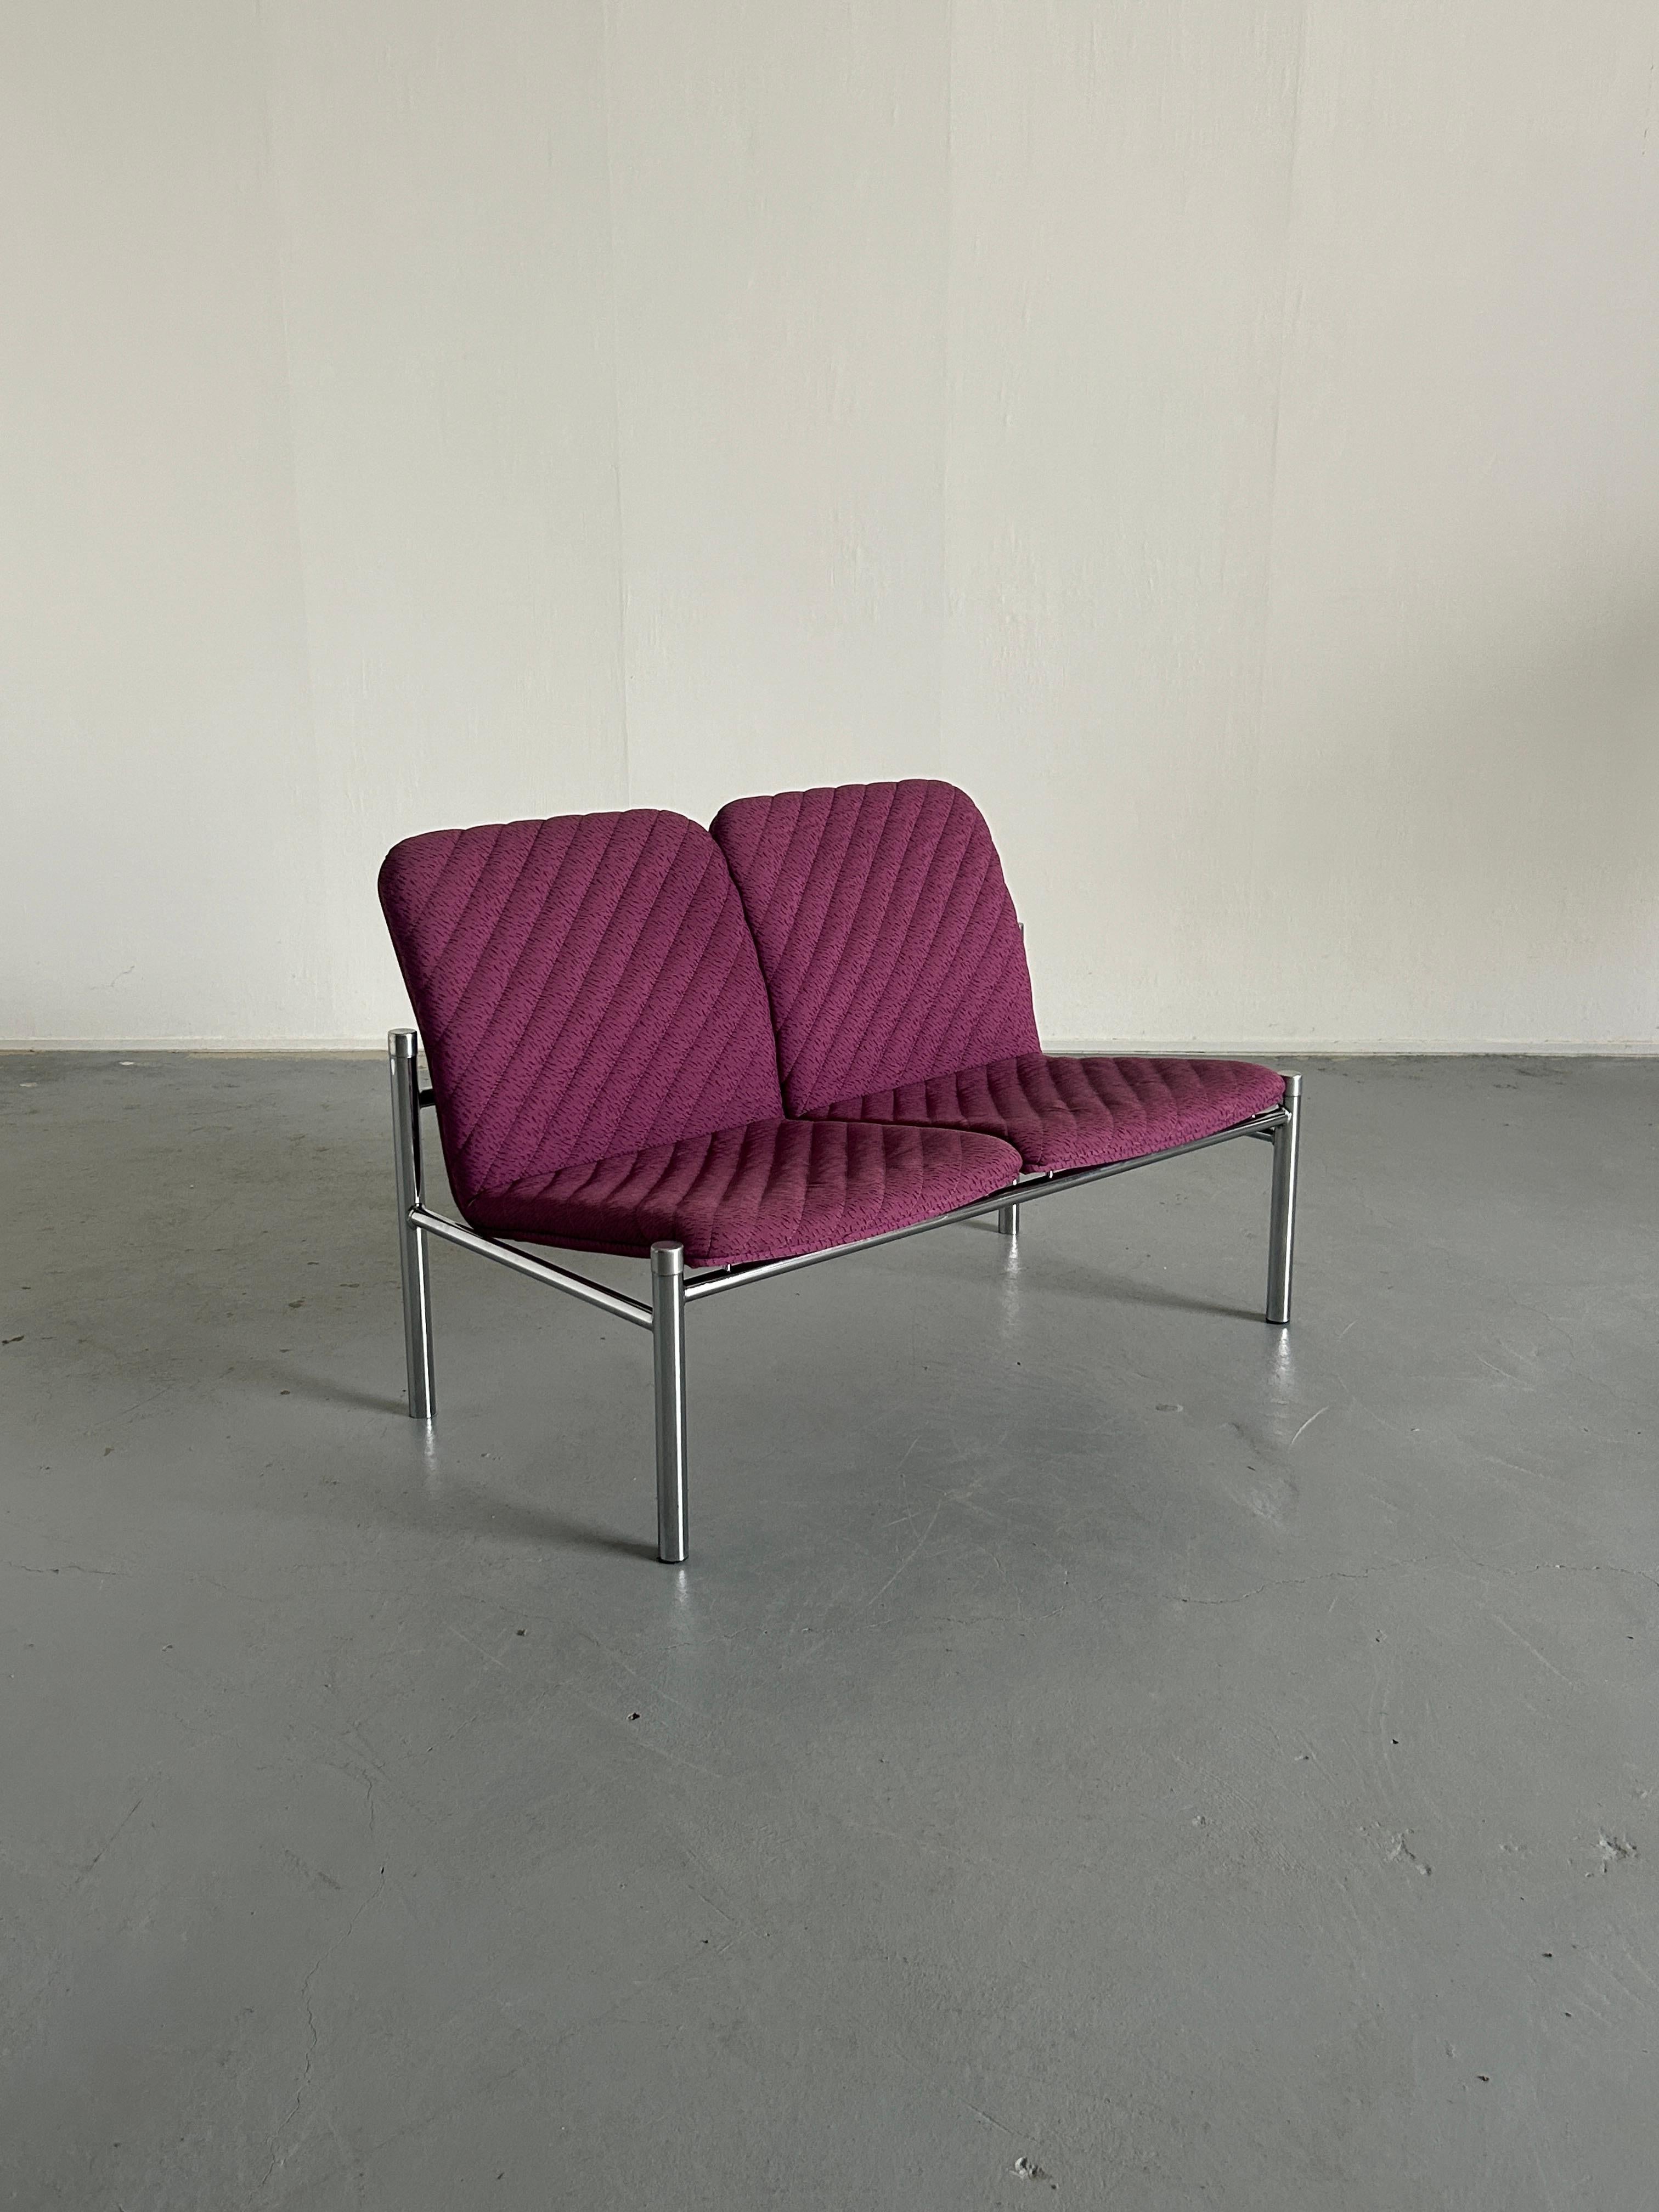 A Mid-Century Modern vintage loveseat sofa in purple upholstery and chrome metal base, designed and produced by Wiesner Hager in Austria, 1980s.

Labeled.

Very good vintage condition with smaller expected signs of age. 
Structurally